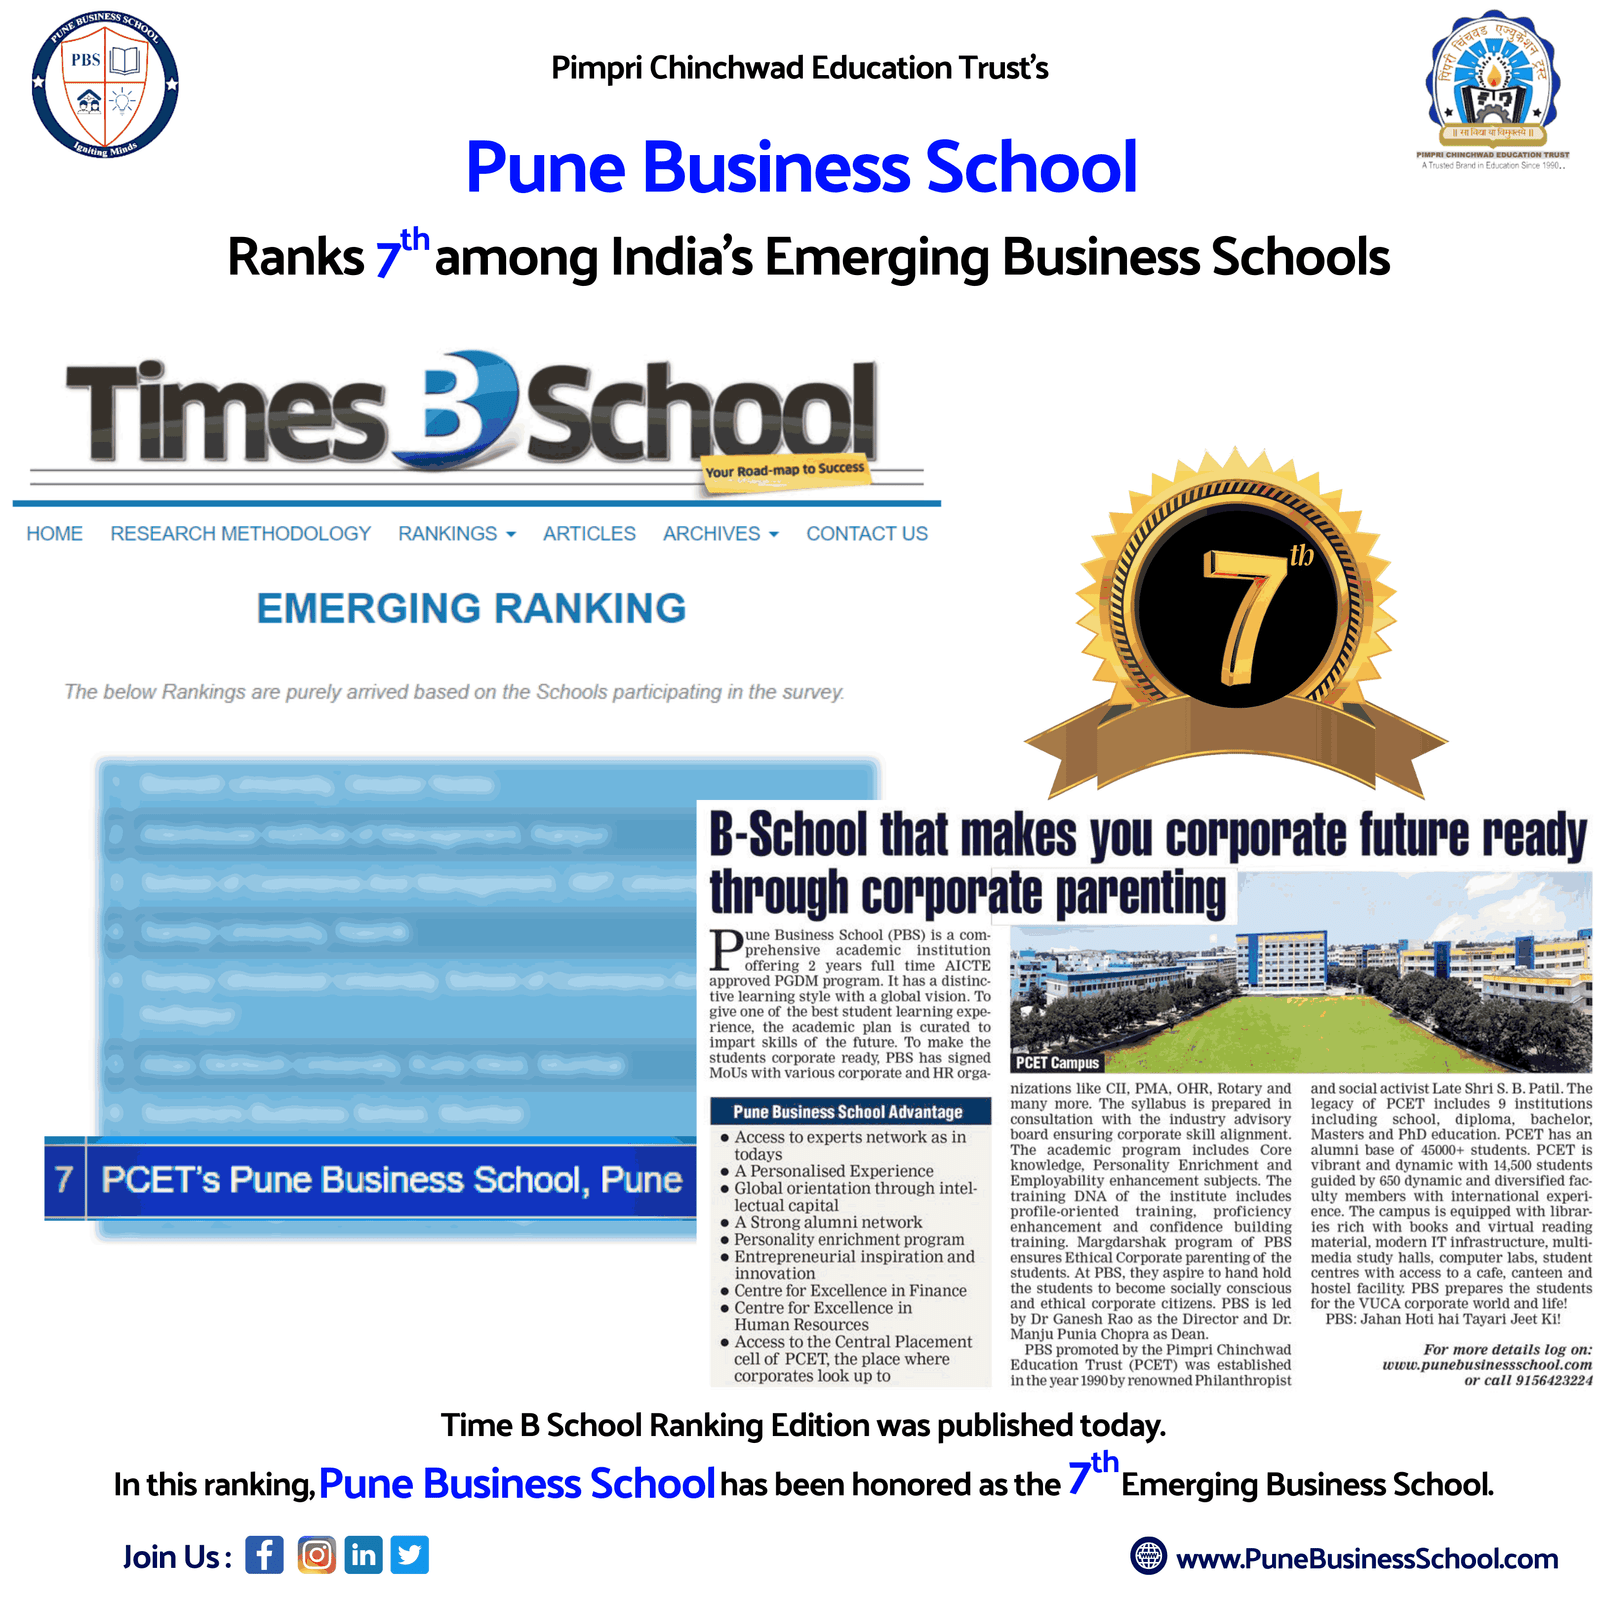 Pune Business School (PBS) ranked 7th among India's Emerging Business Schools